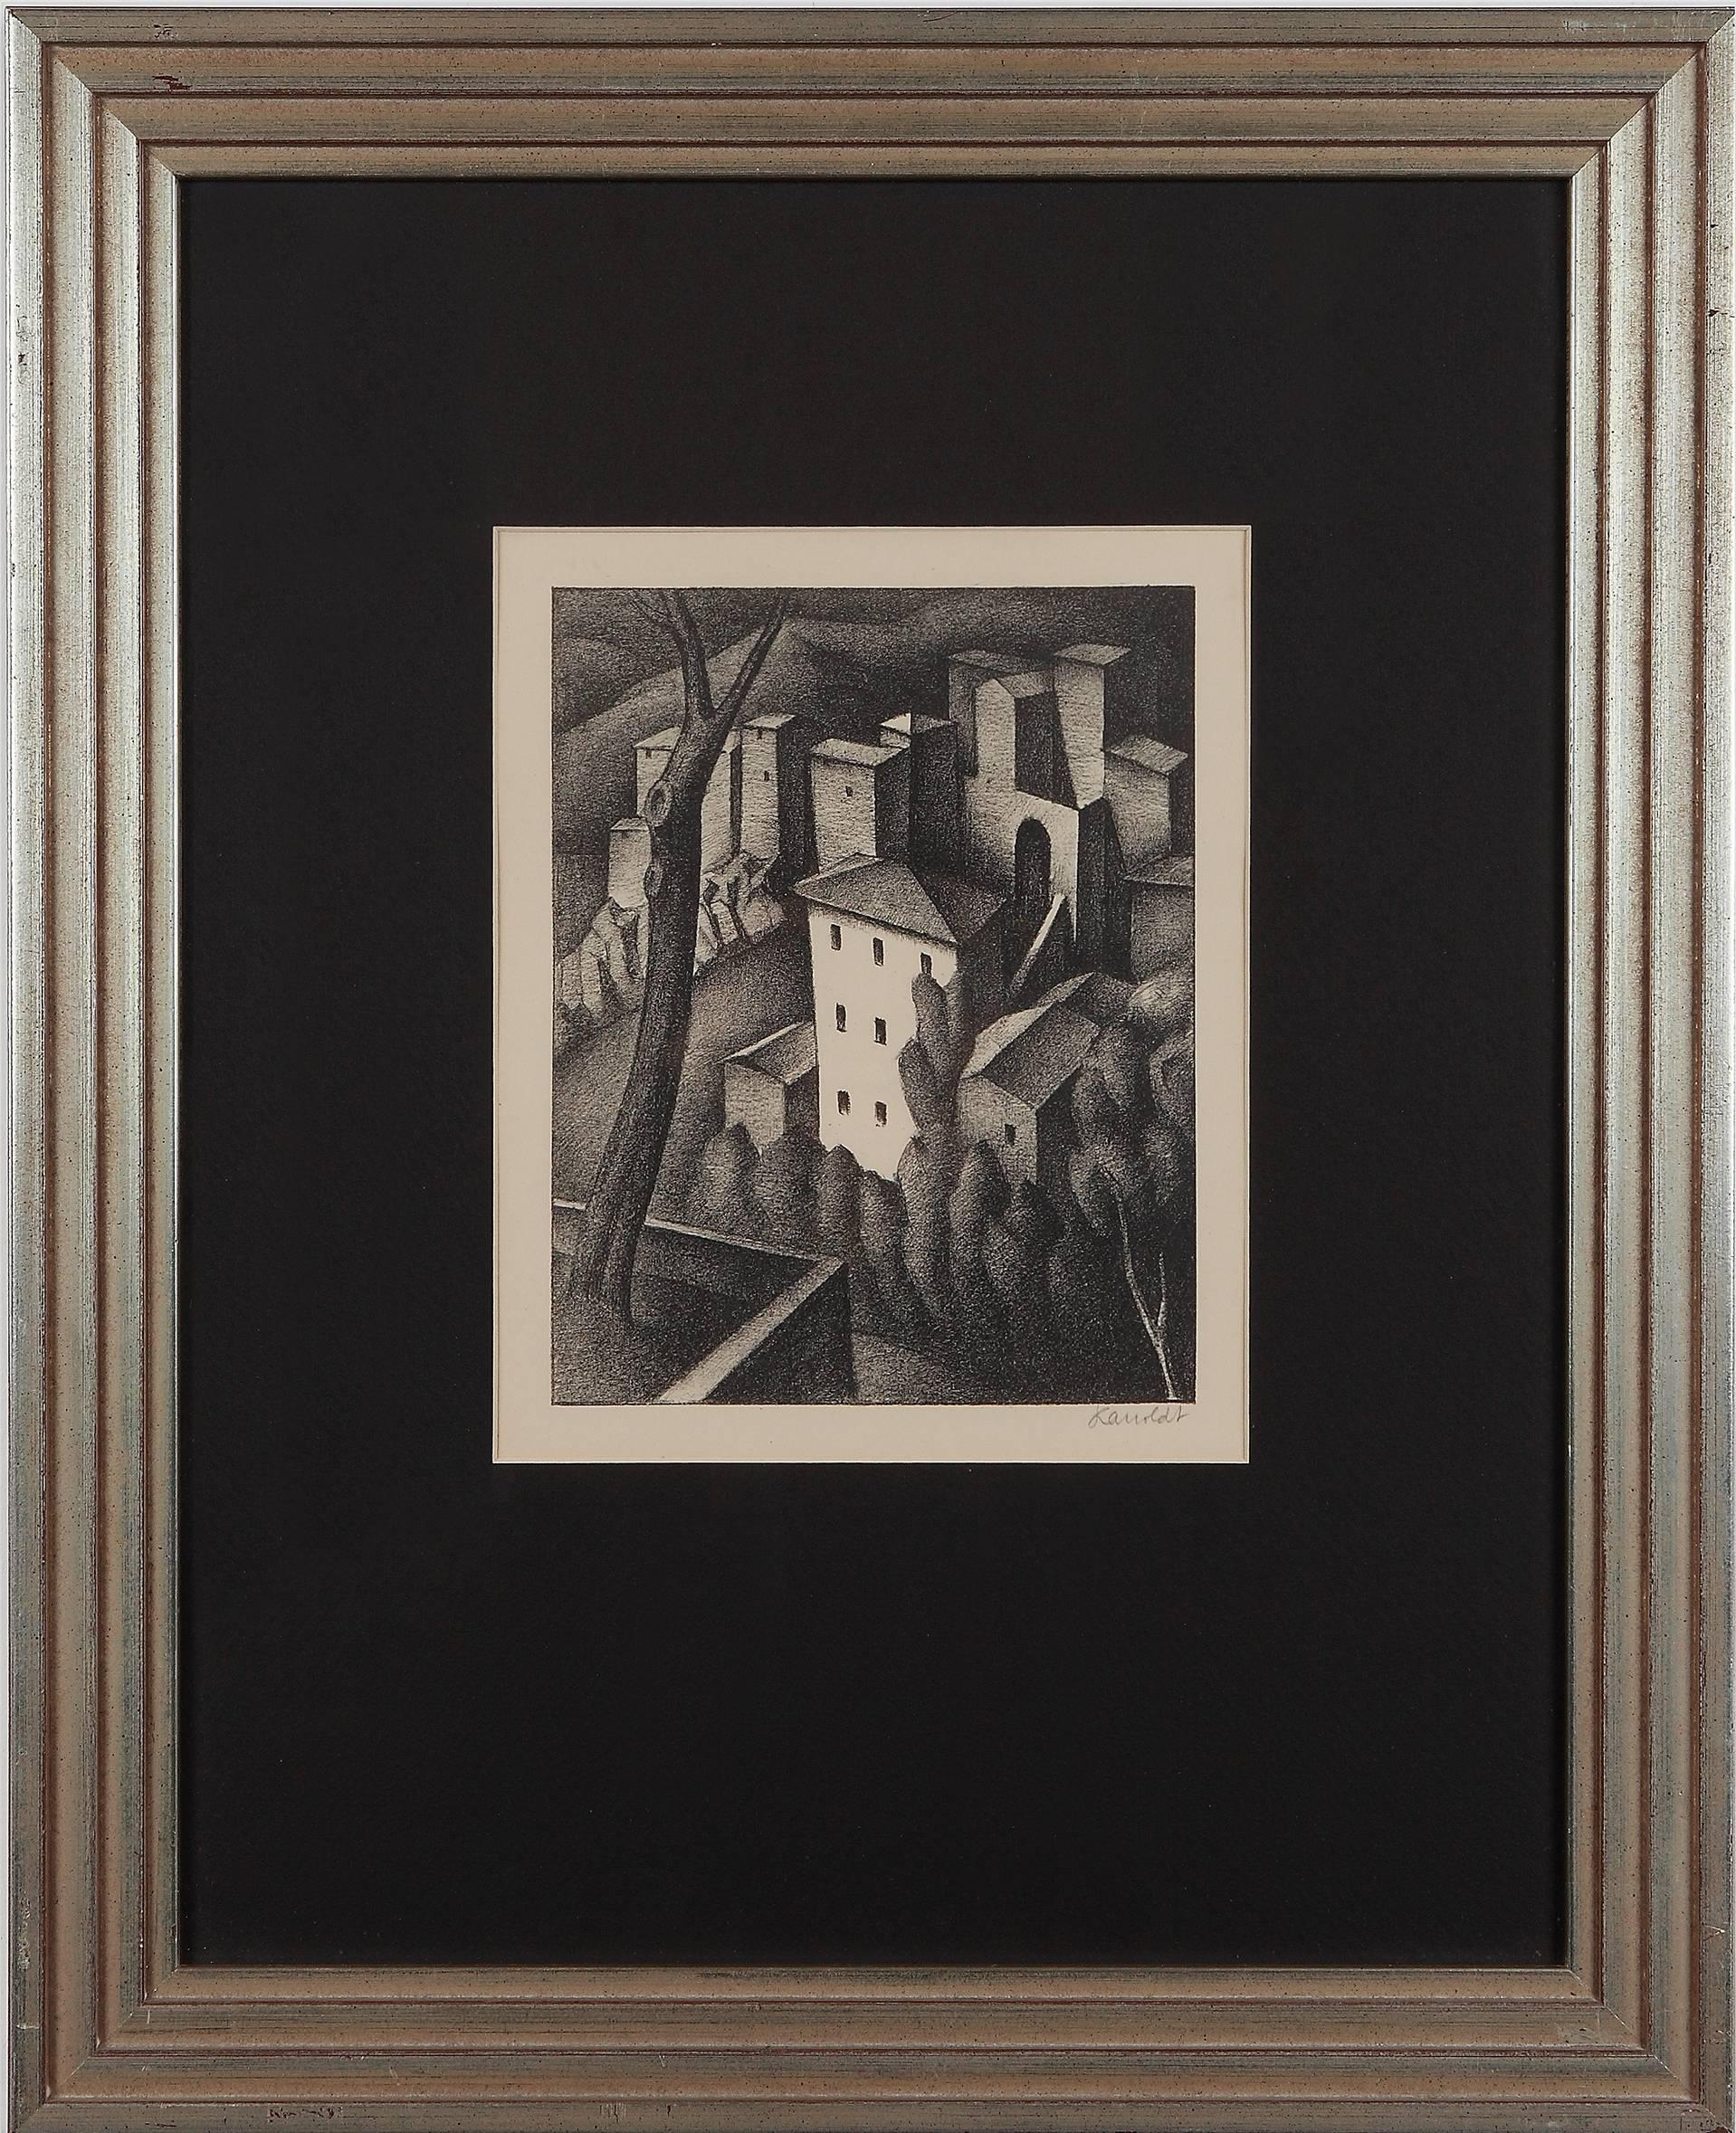 Lithograph on paper, 1925 by Alexander Kanoldt, Germany. Signed in pencil lower right with 